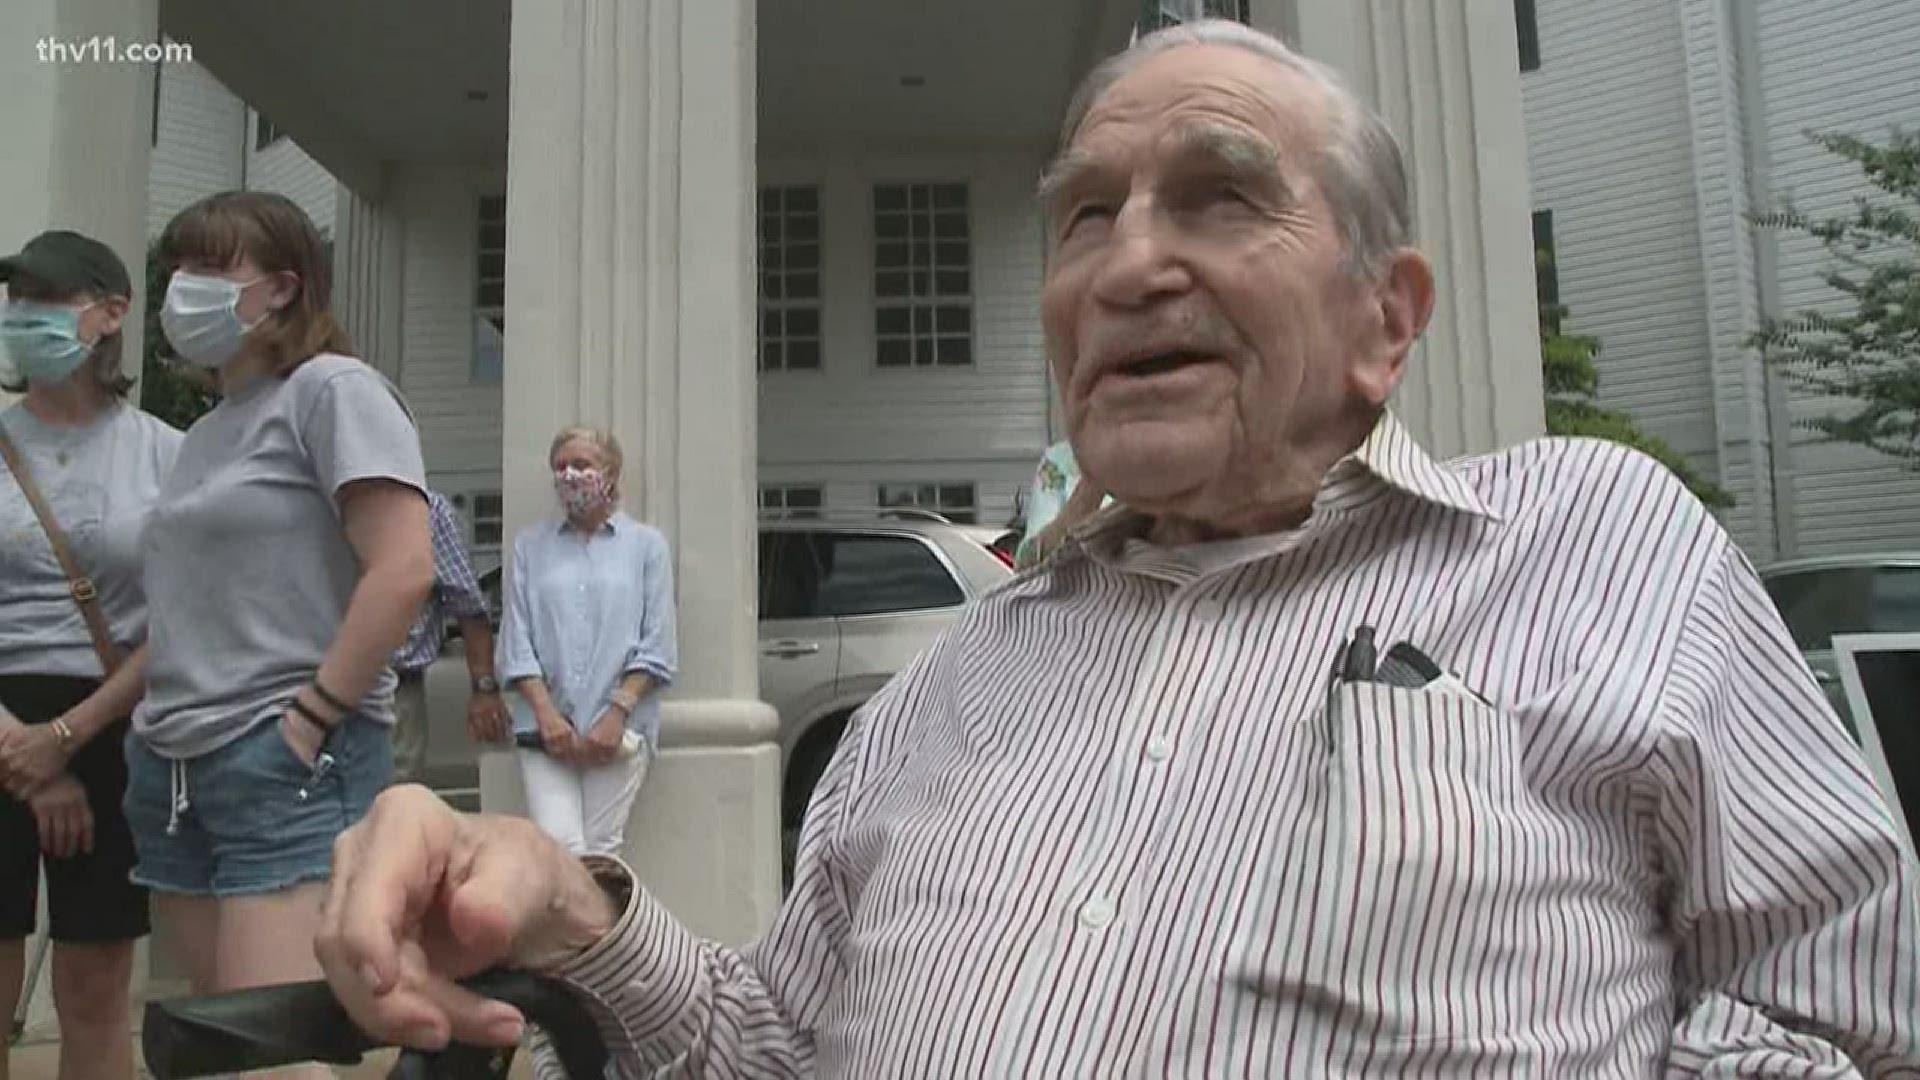 Gordon Earl Bentley celebrated his 100th birthday today with a parade and flyover at his retirement home in Conway.